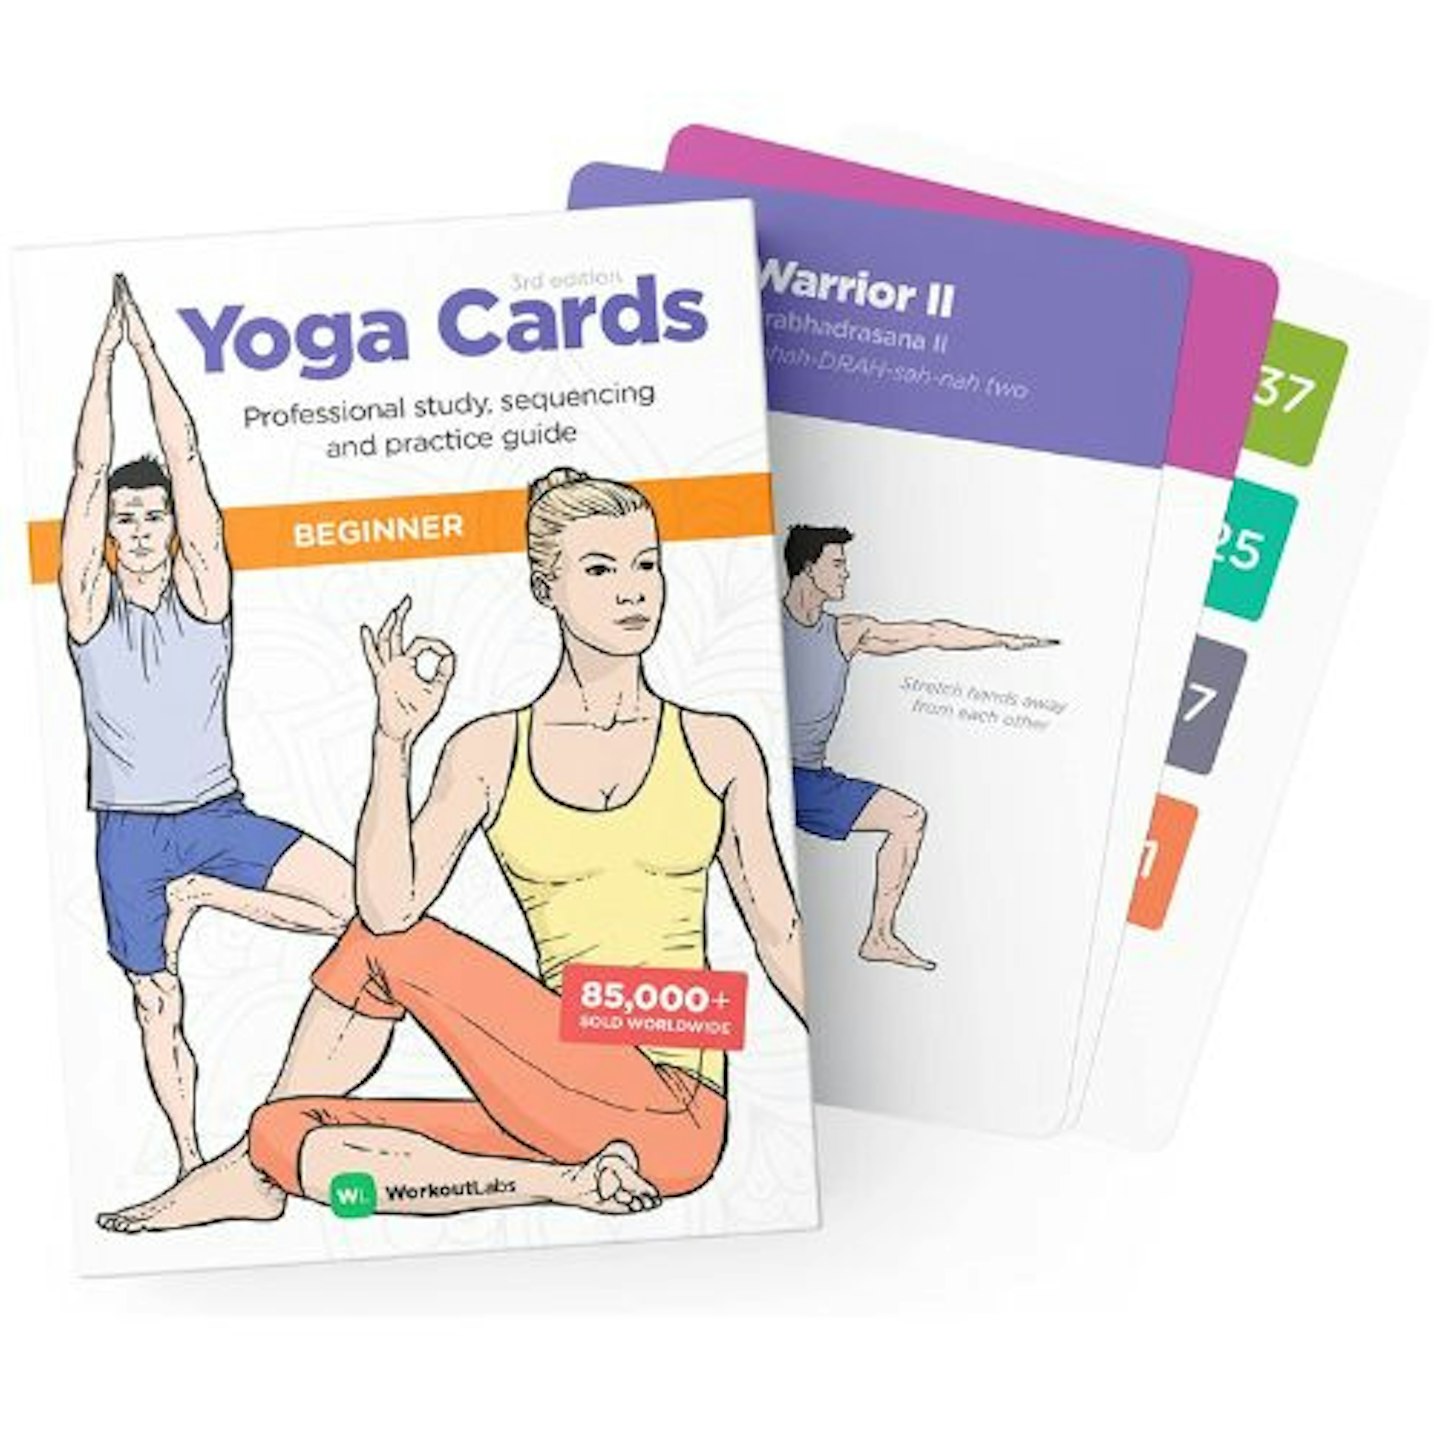 WorkoutLabs YOGA CARDS - Beginners: Professional Visual Study, Class Sequencing & Practice Guide with Essential Poses, Breathing Exercises &...